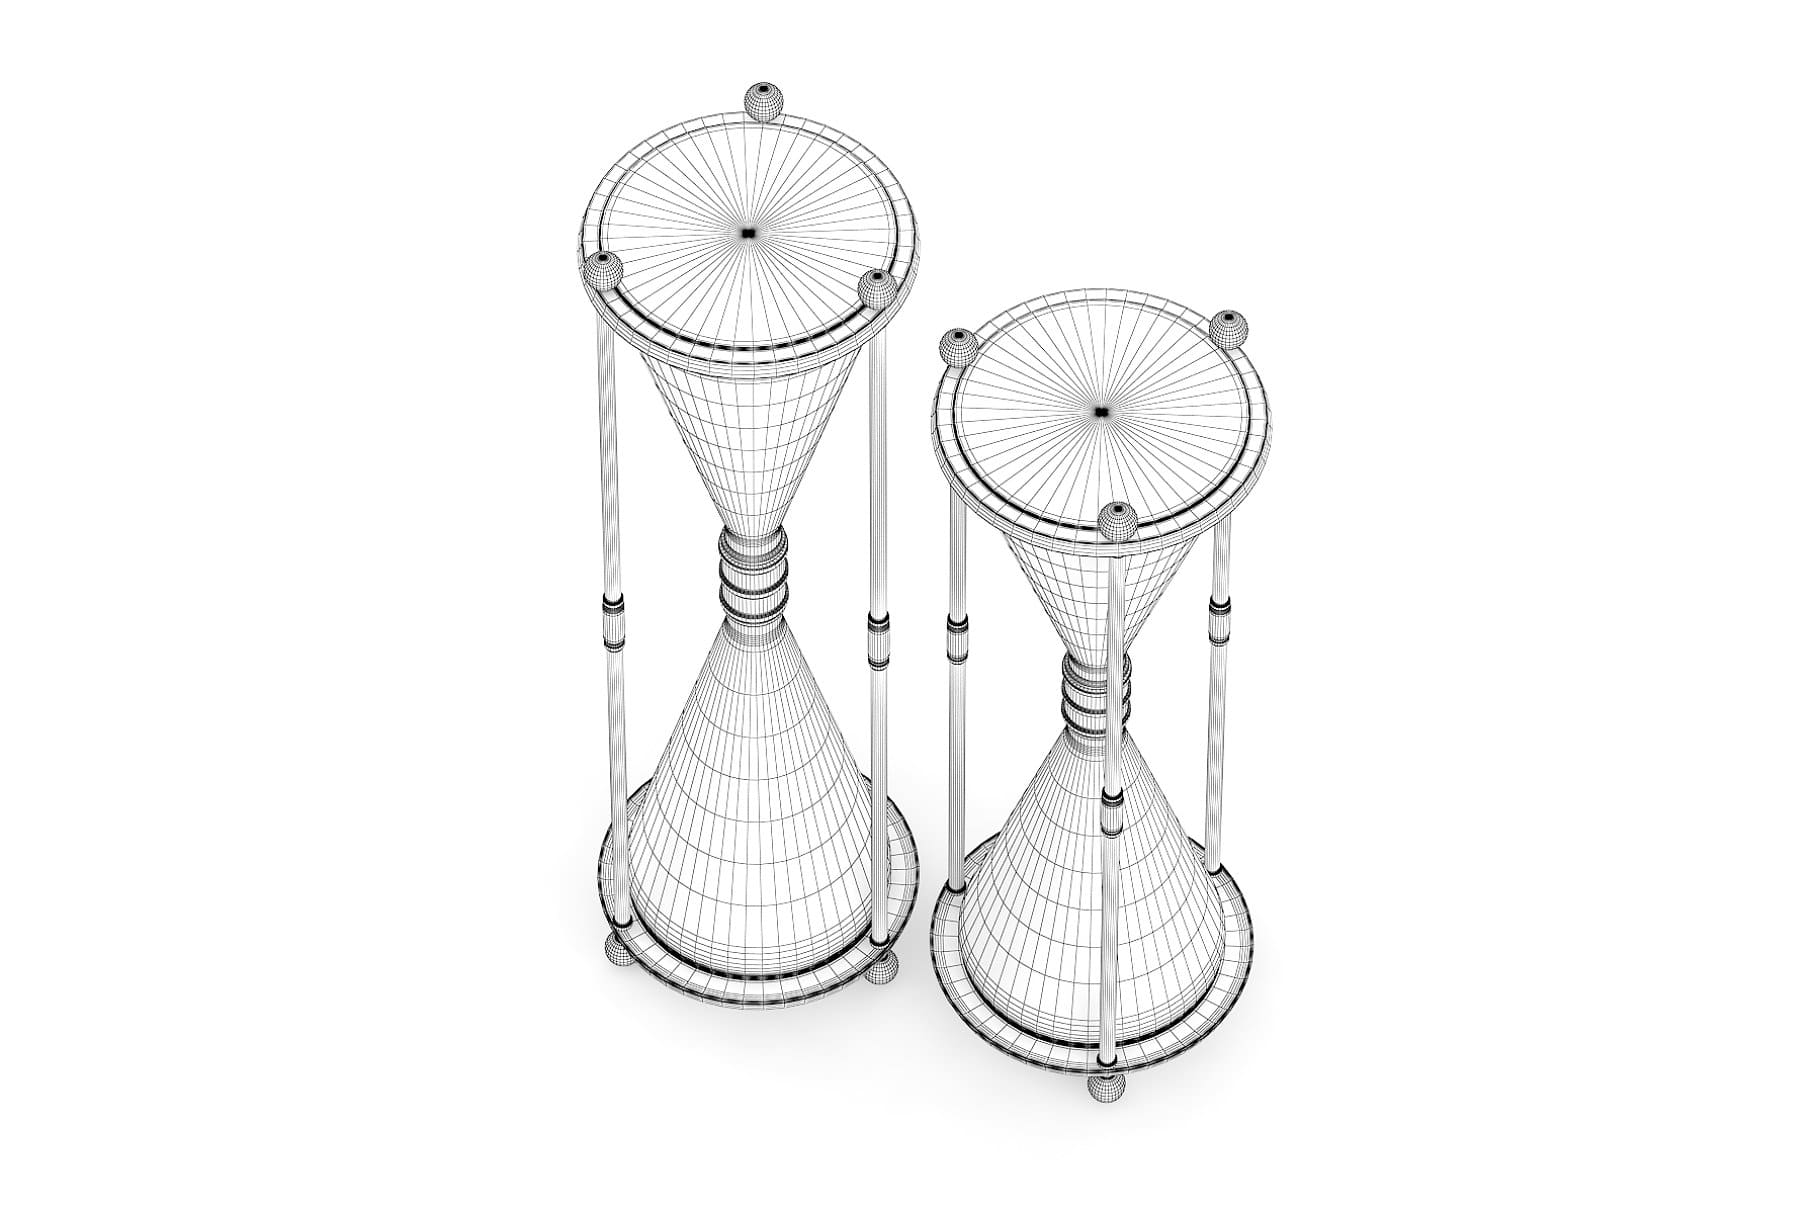 3D model of an hourglass top view.